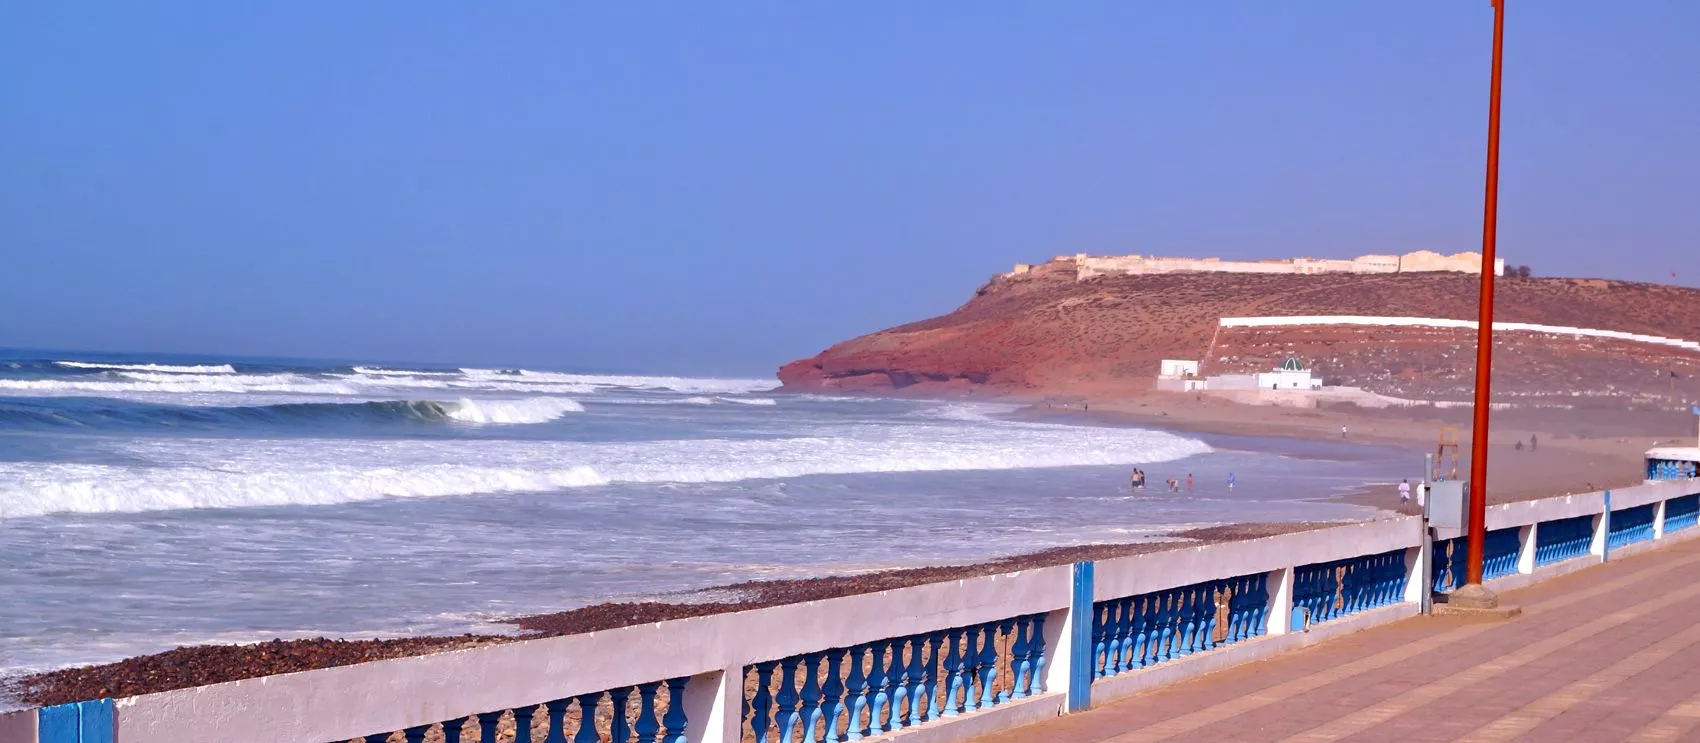 Plage Imourane in Morocco, Africa | Surfing,Beaches - Rated 0.8